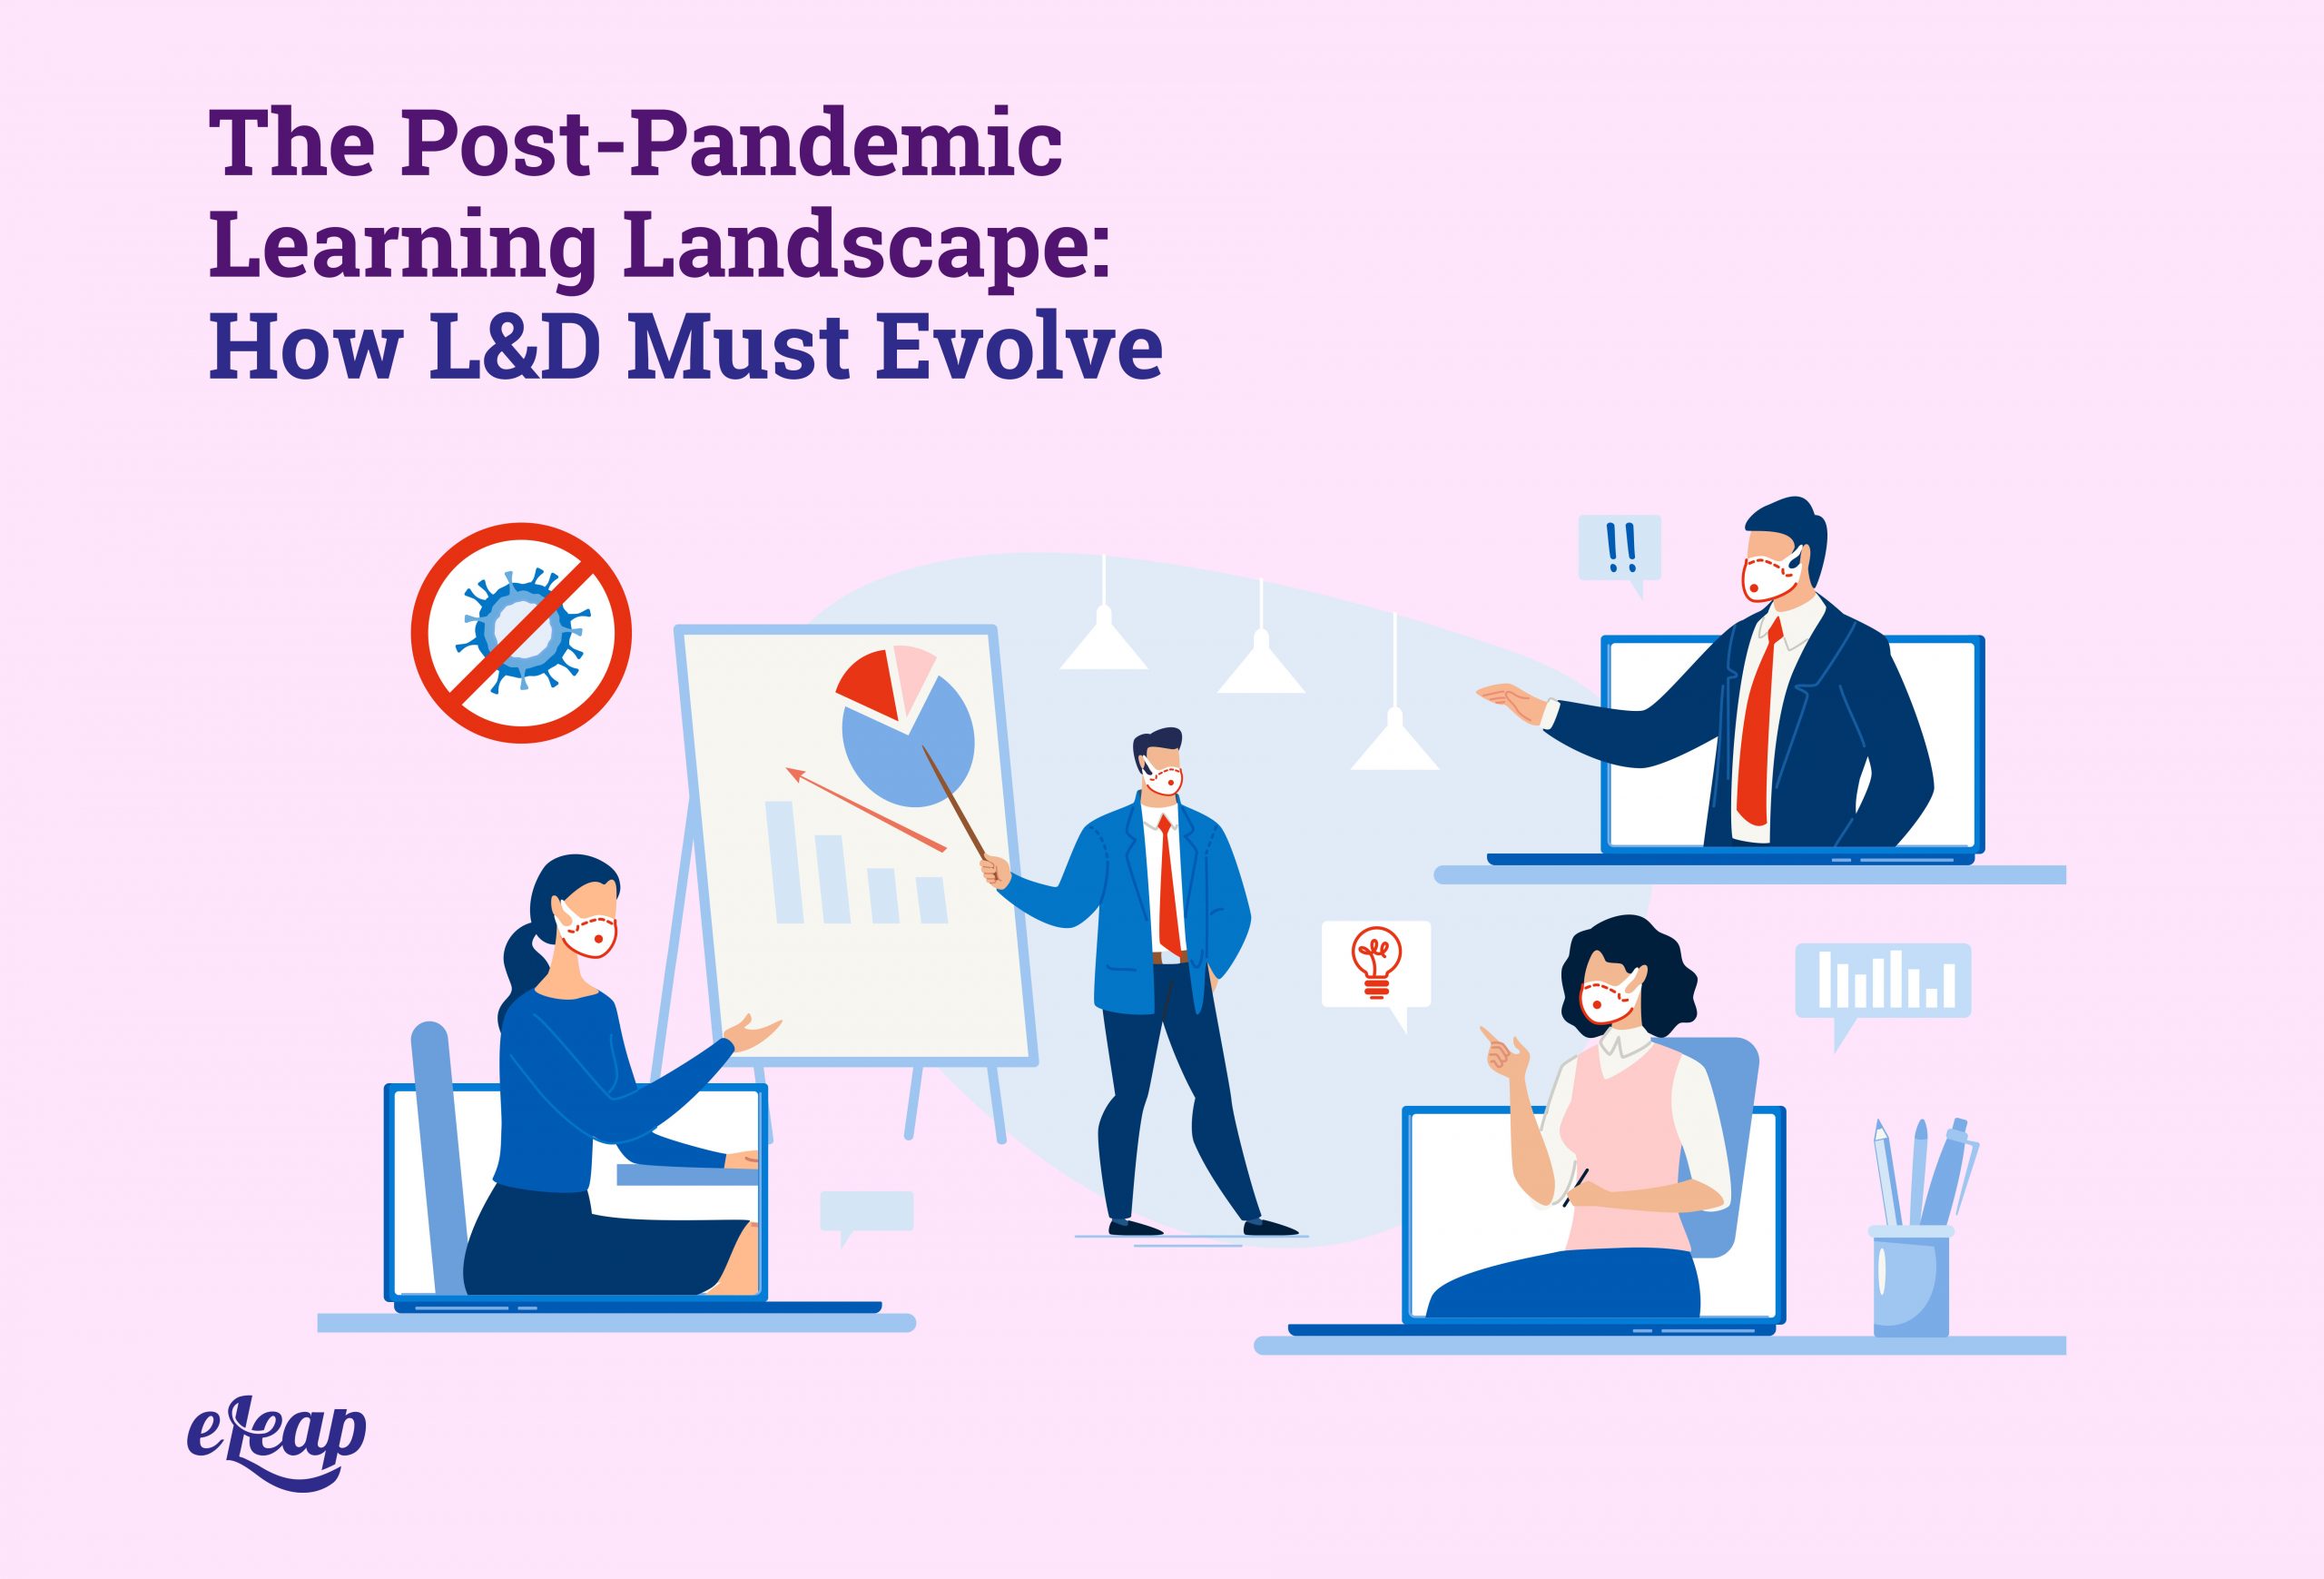 The Post-Pandemic Learning Landscape: How L&D Must Evolve